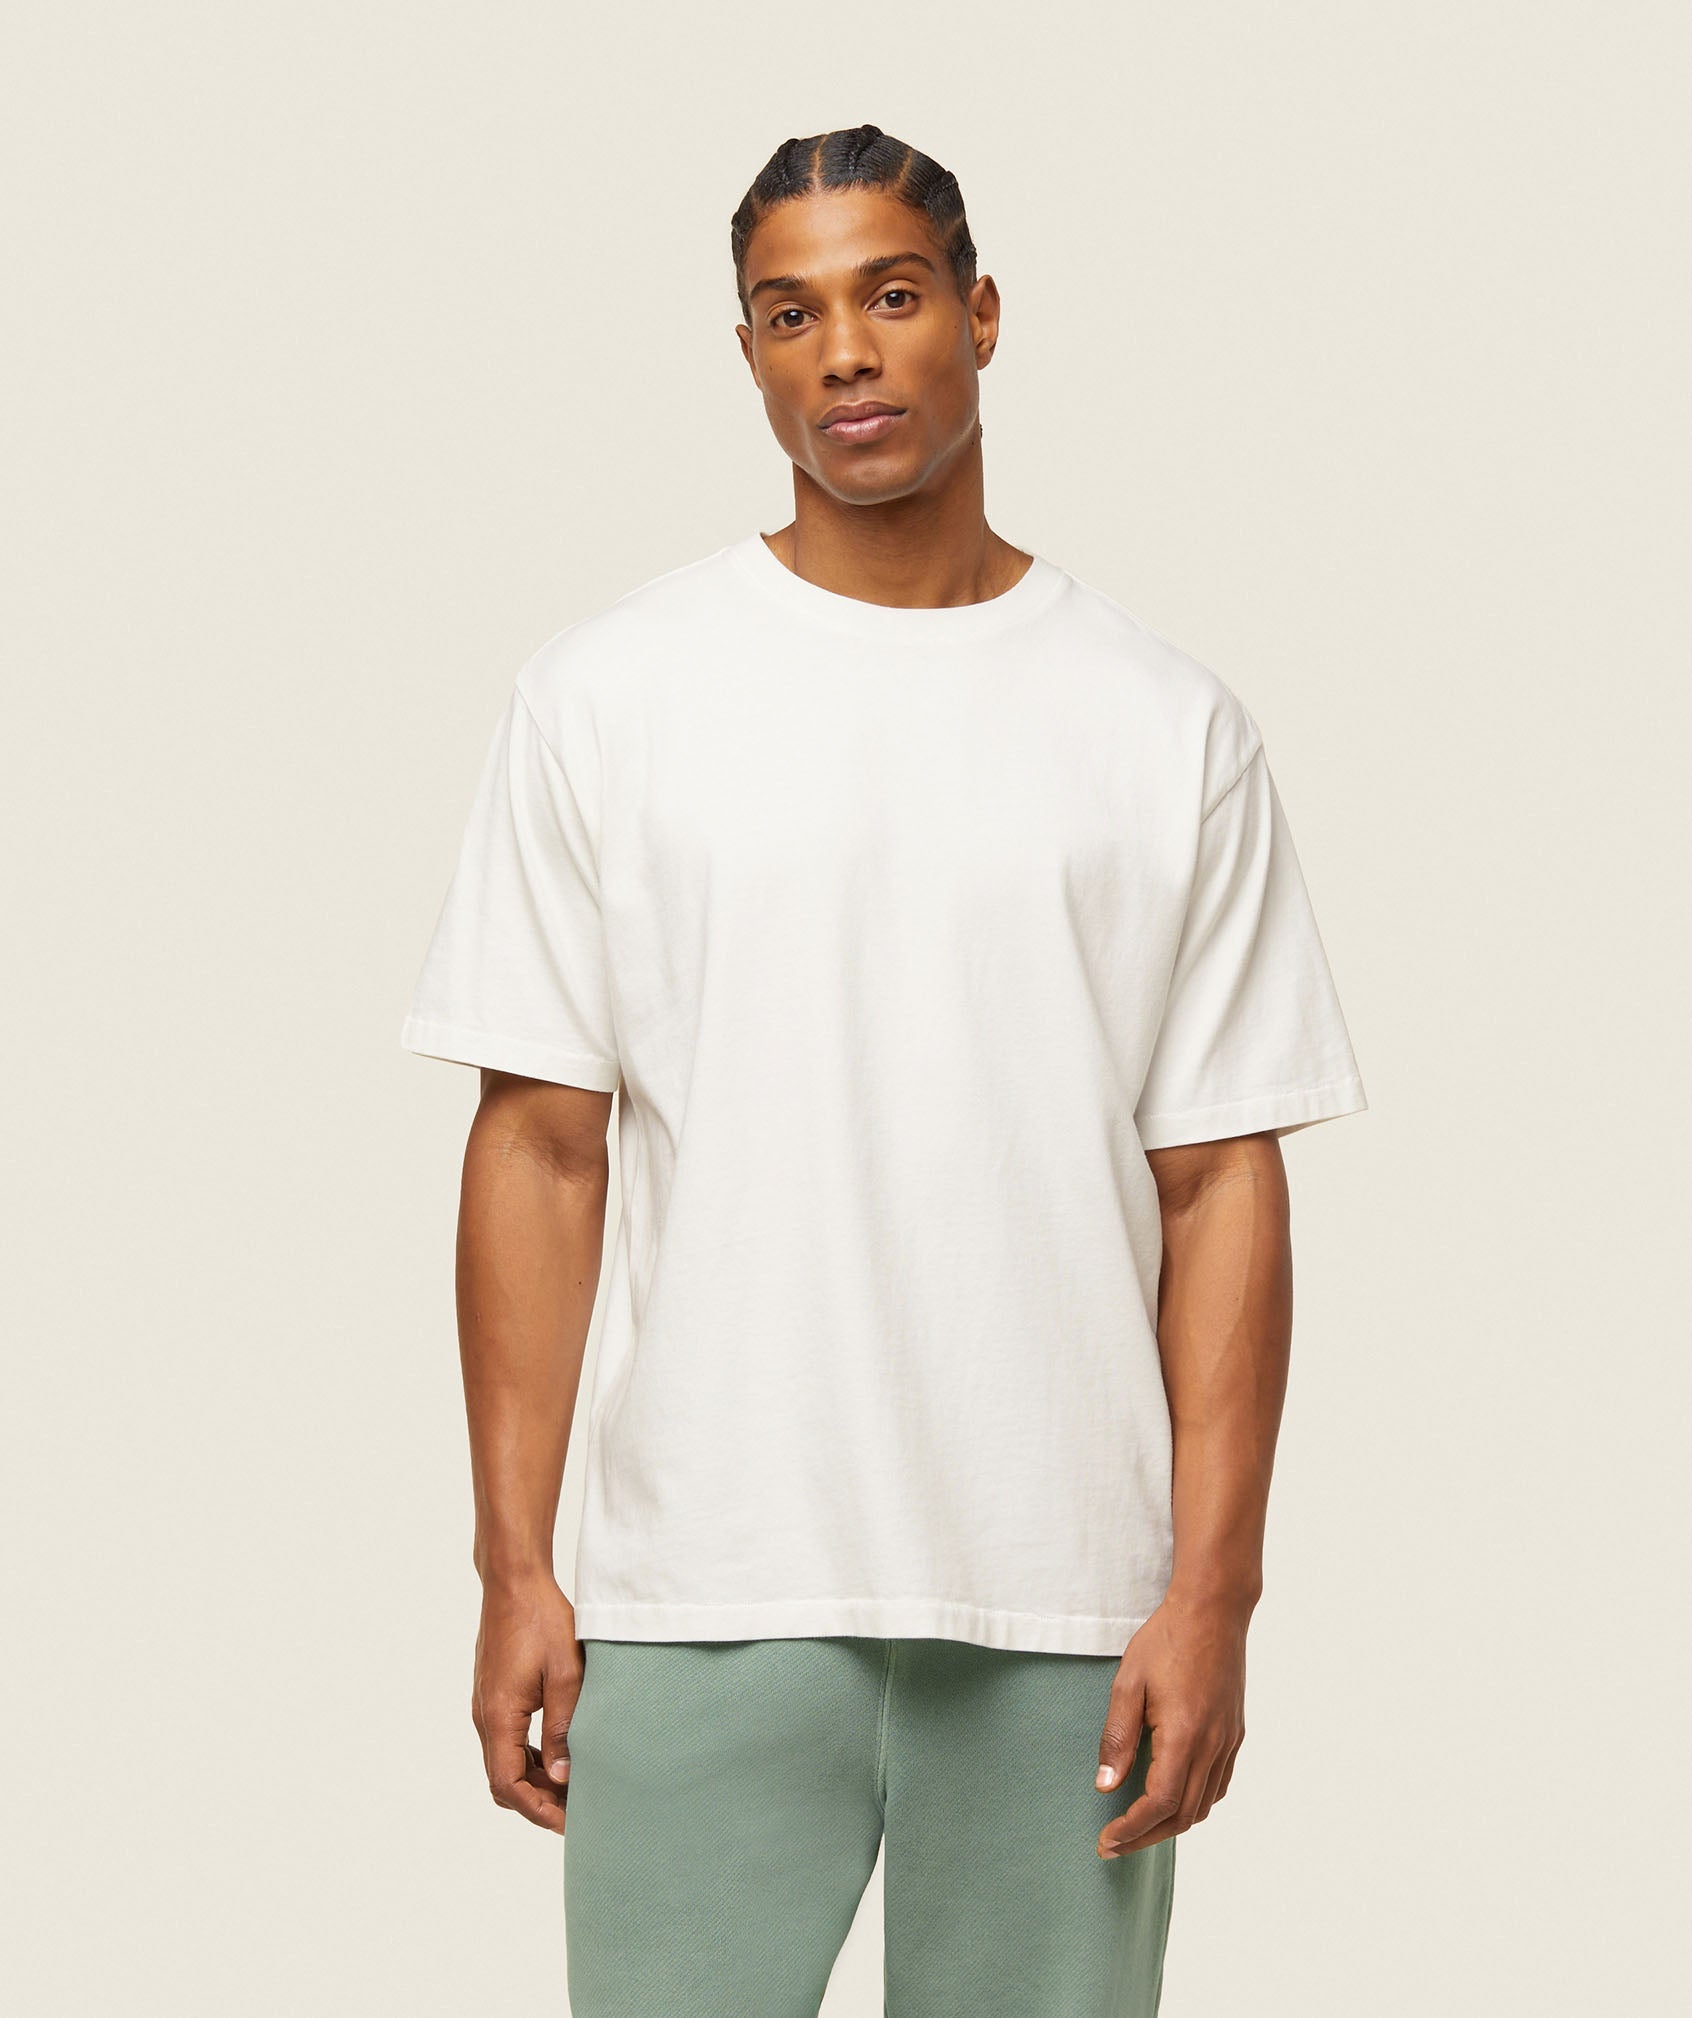 everywear Relaxed T-Shirt in Soft White - view 1